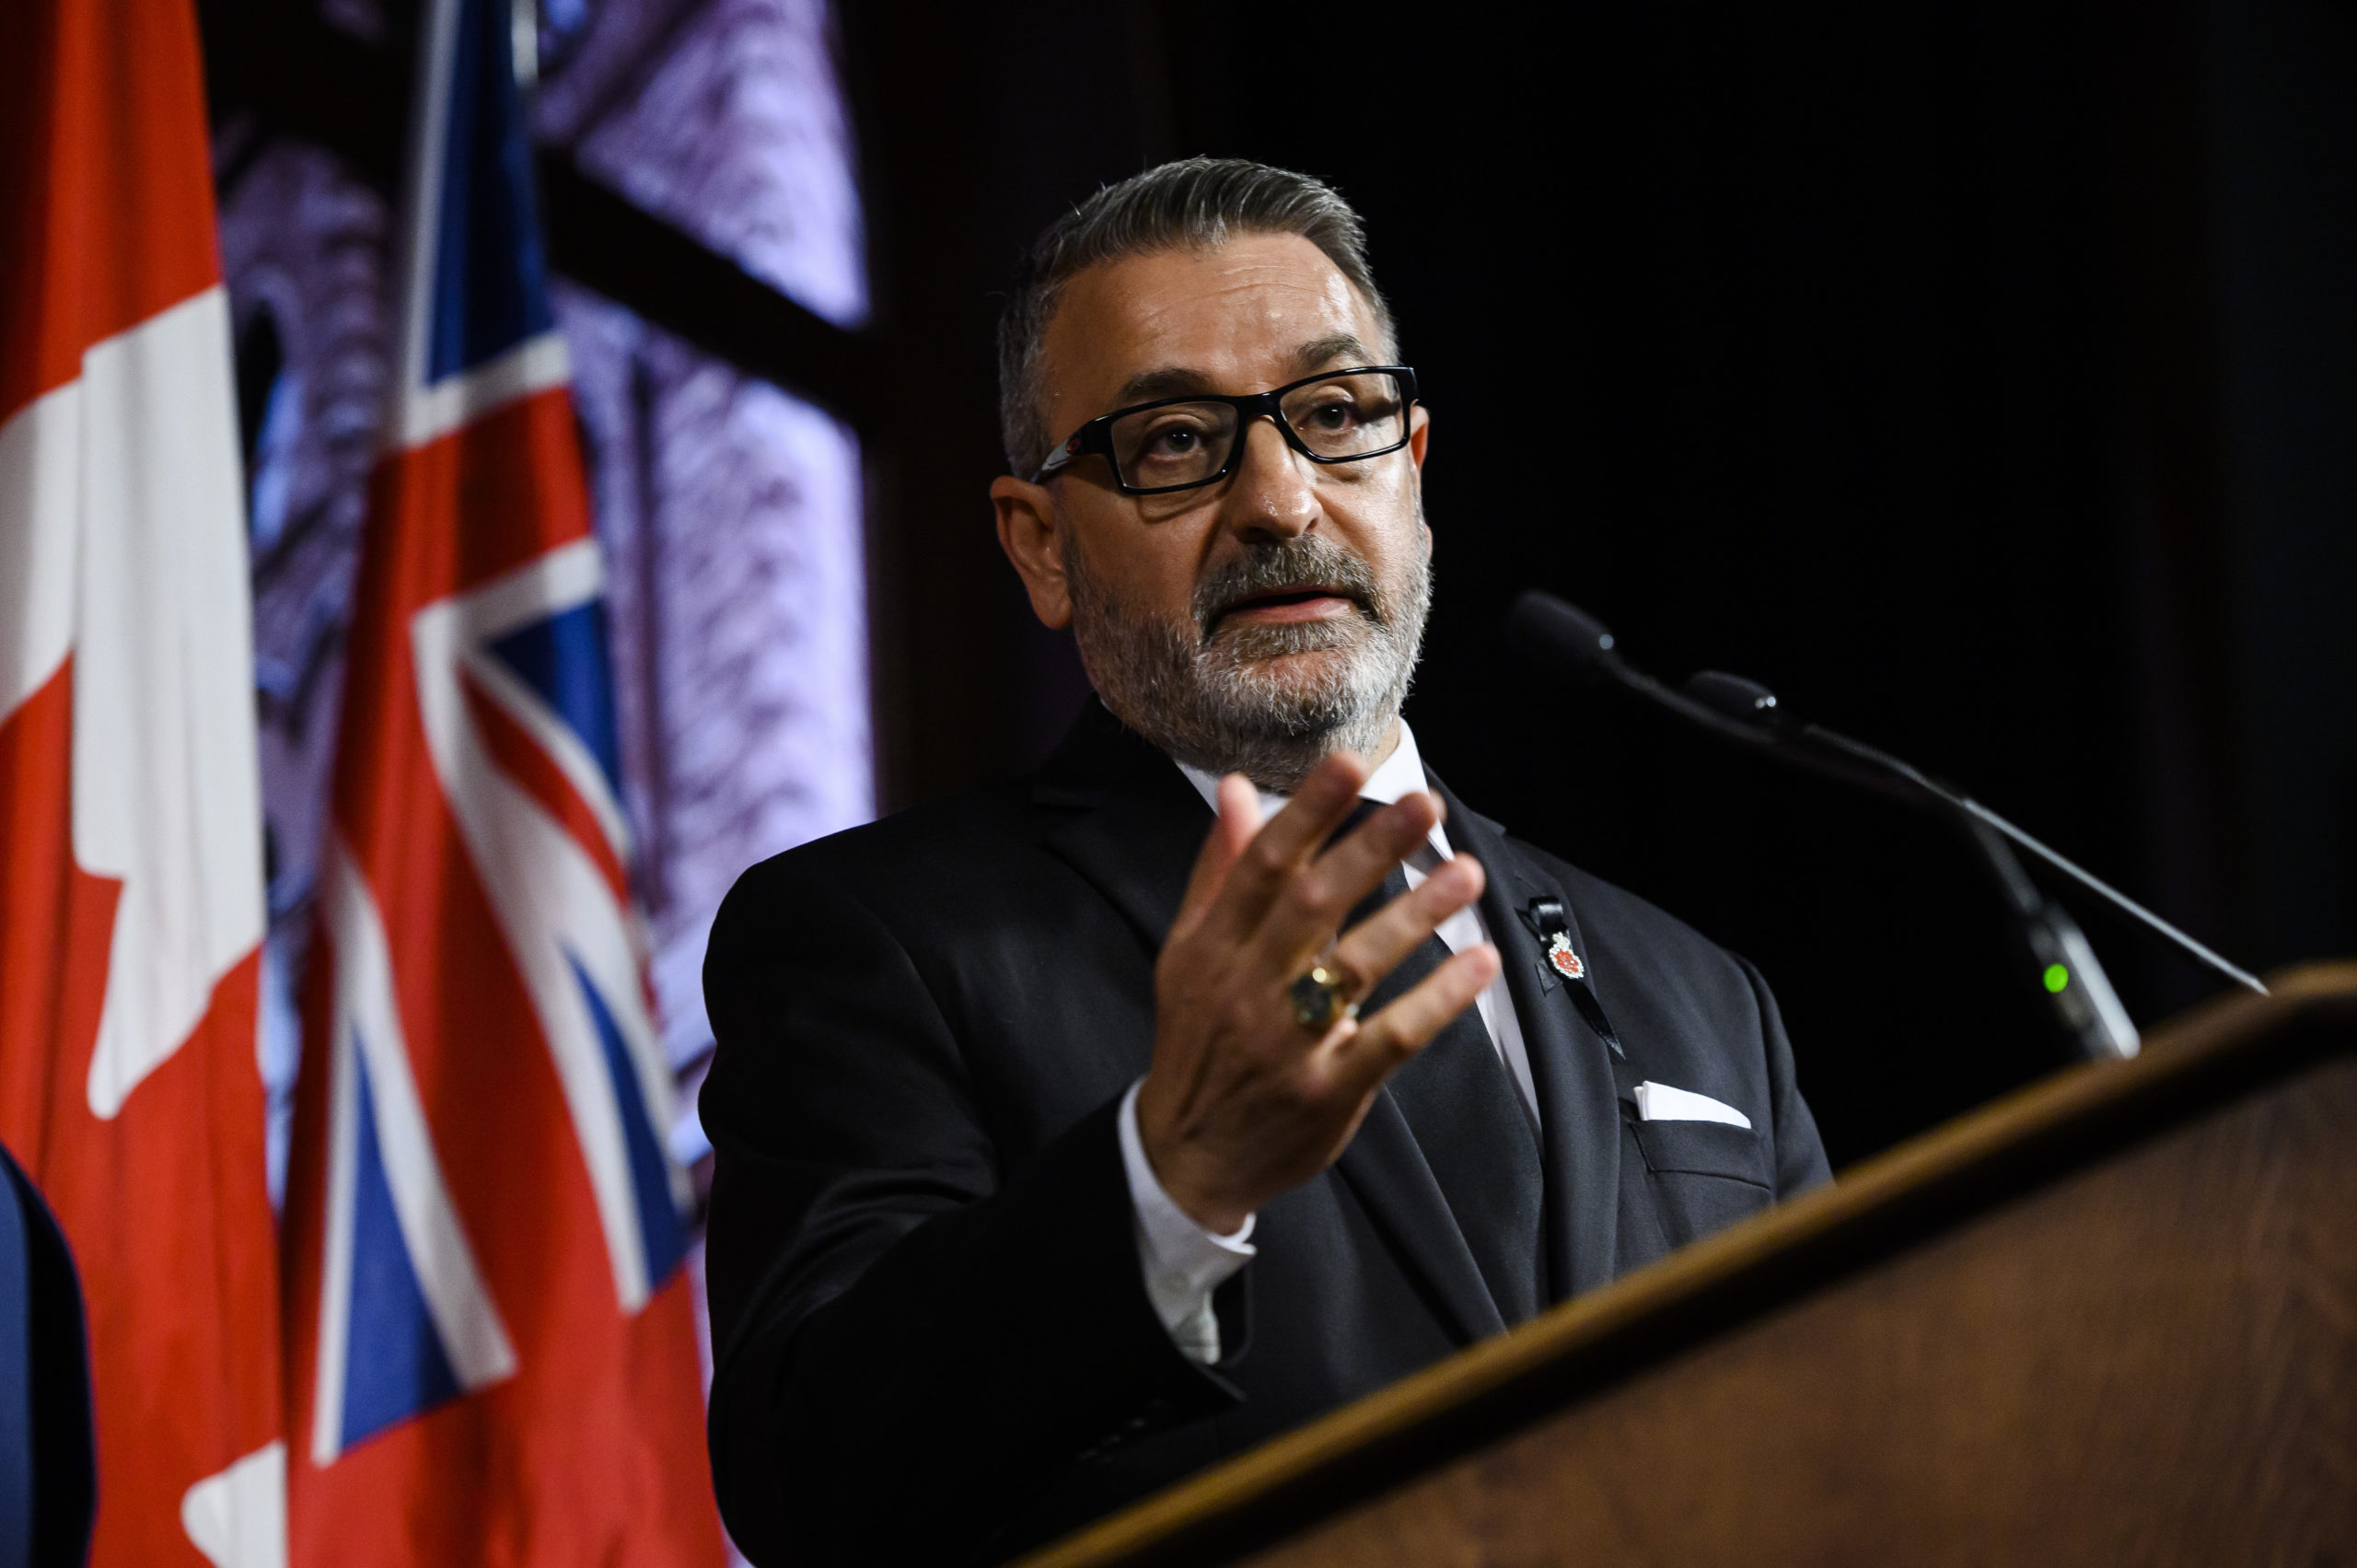 Ontario housing minister to make announcement amid Peel Region uncertainty